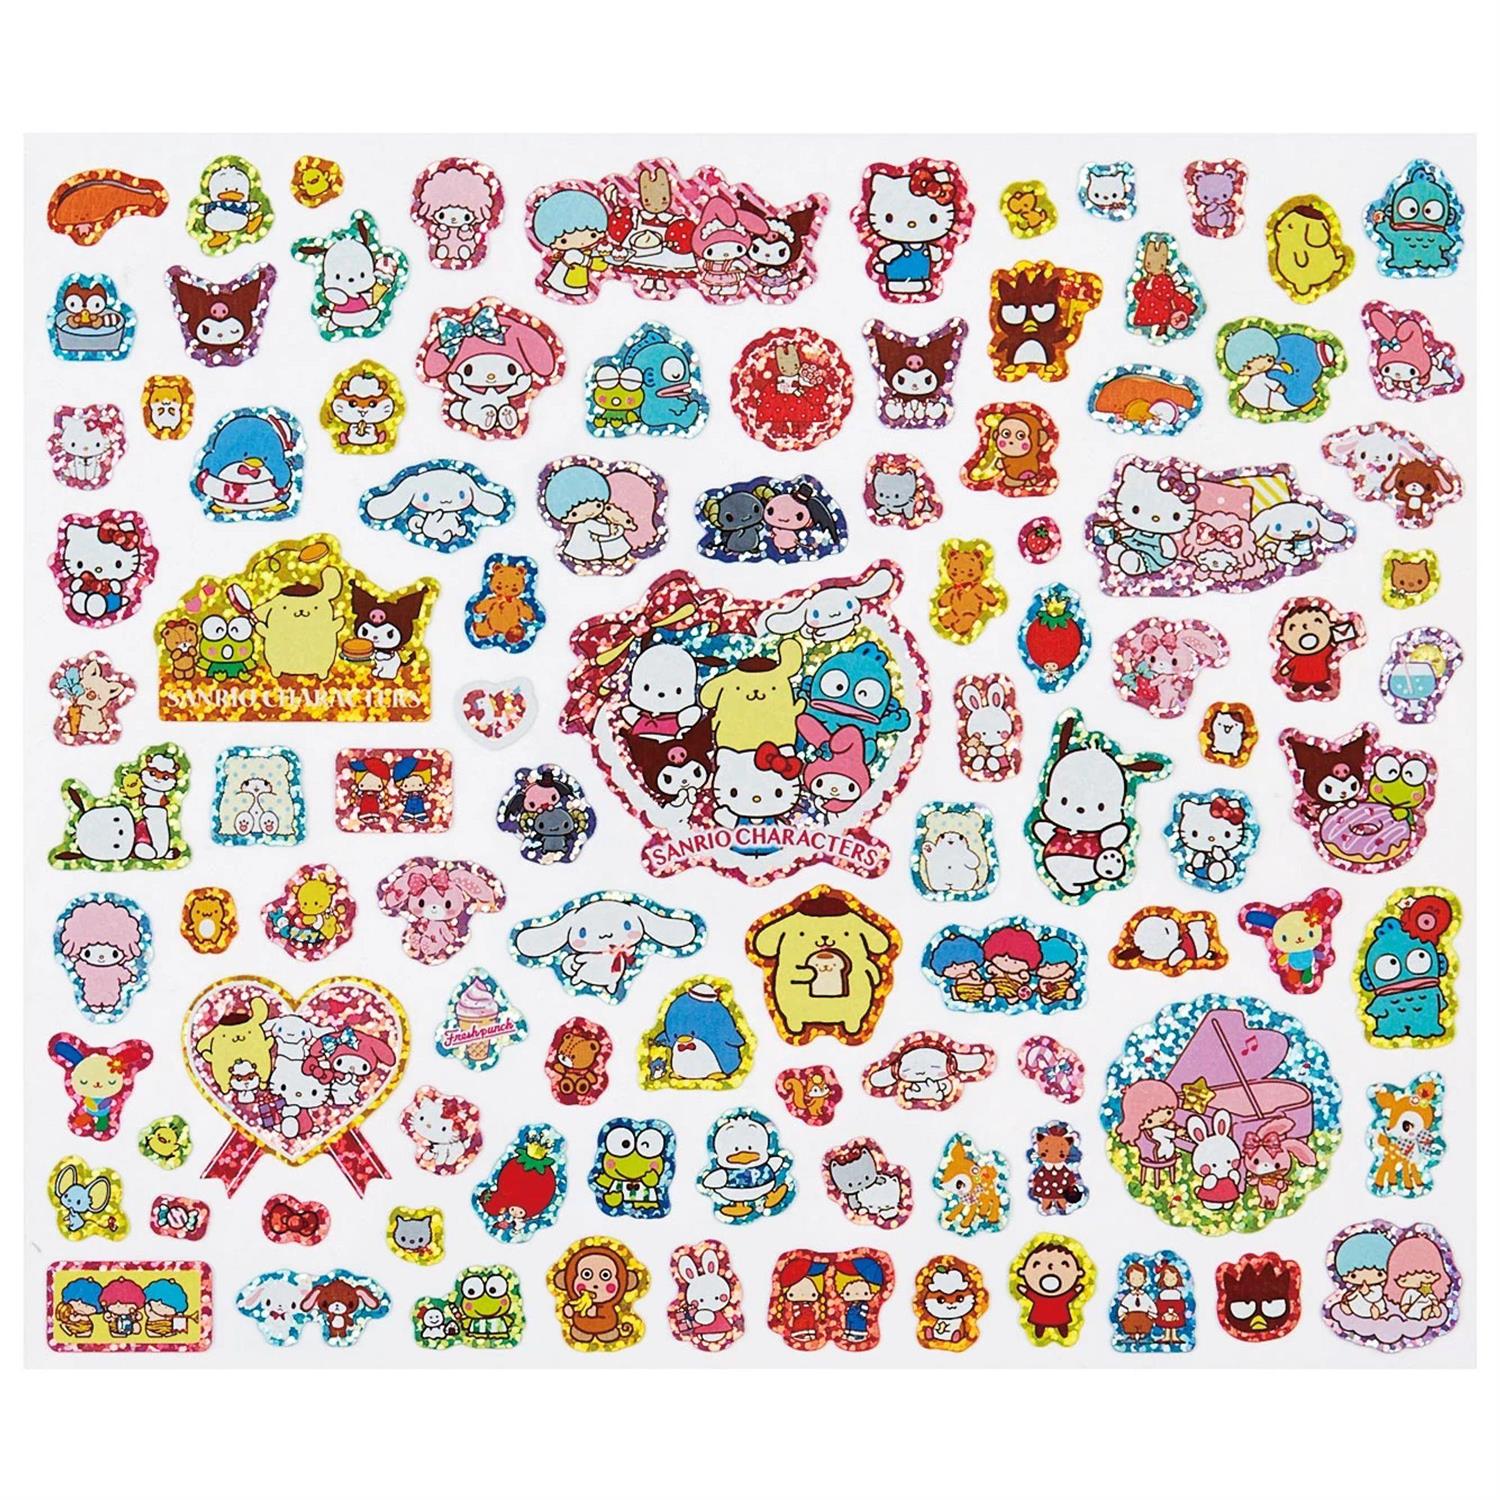 SANRIO CHARACTER HELLO KITTY DINOSAUR COSTUME DINO MOUSE PAD LOVELY IT